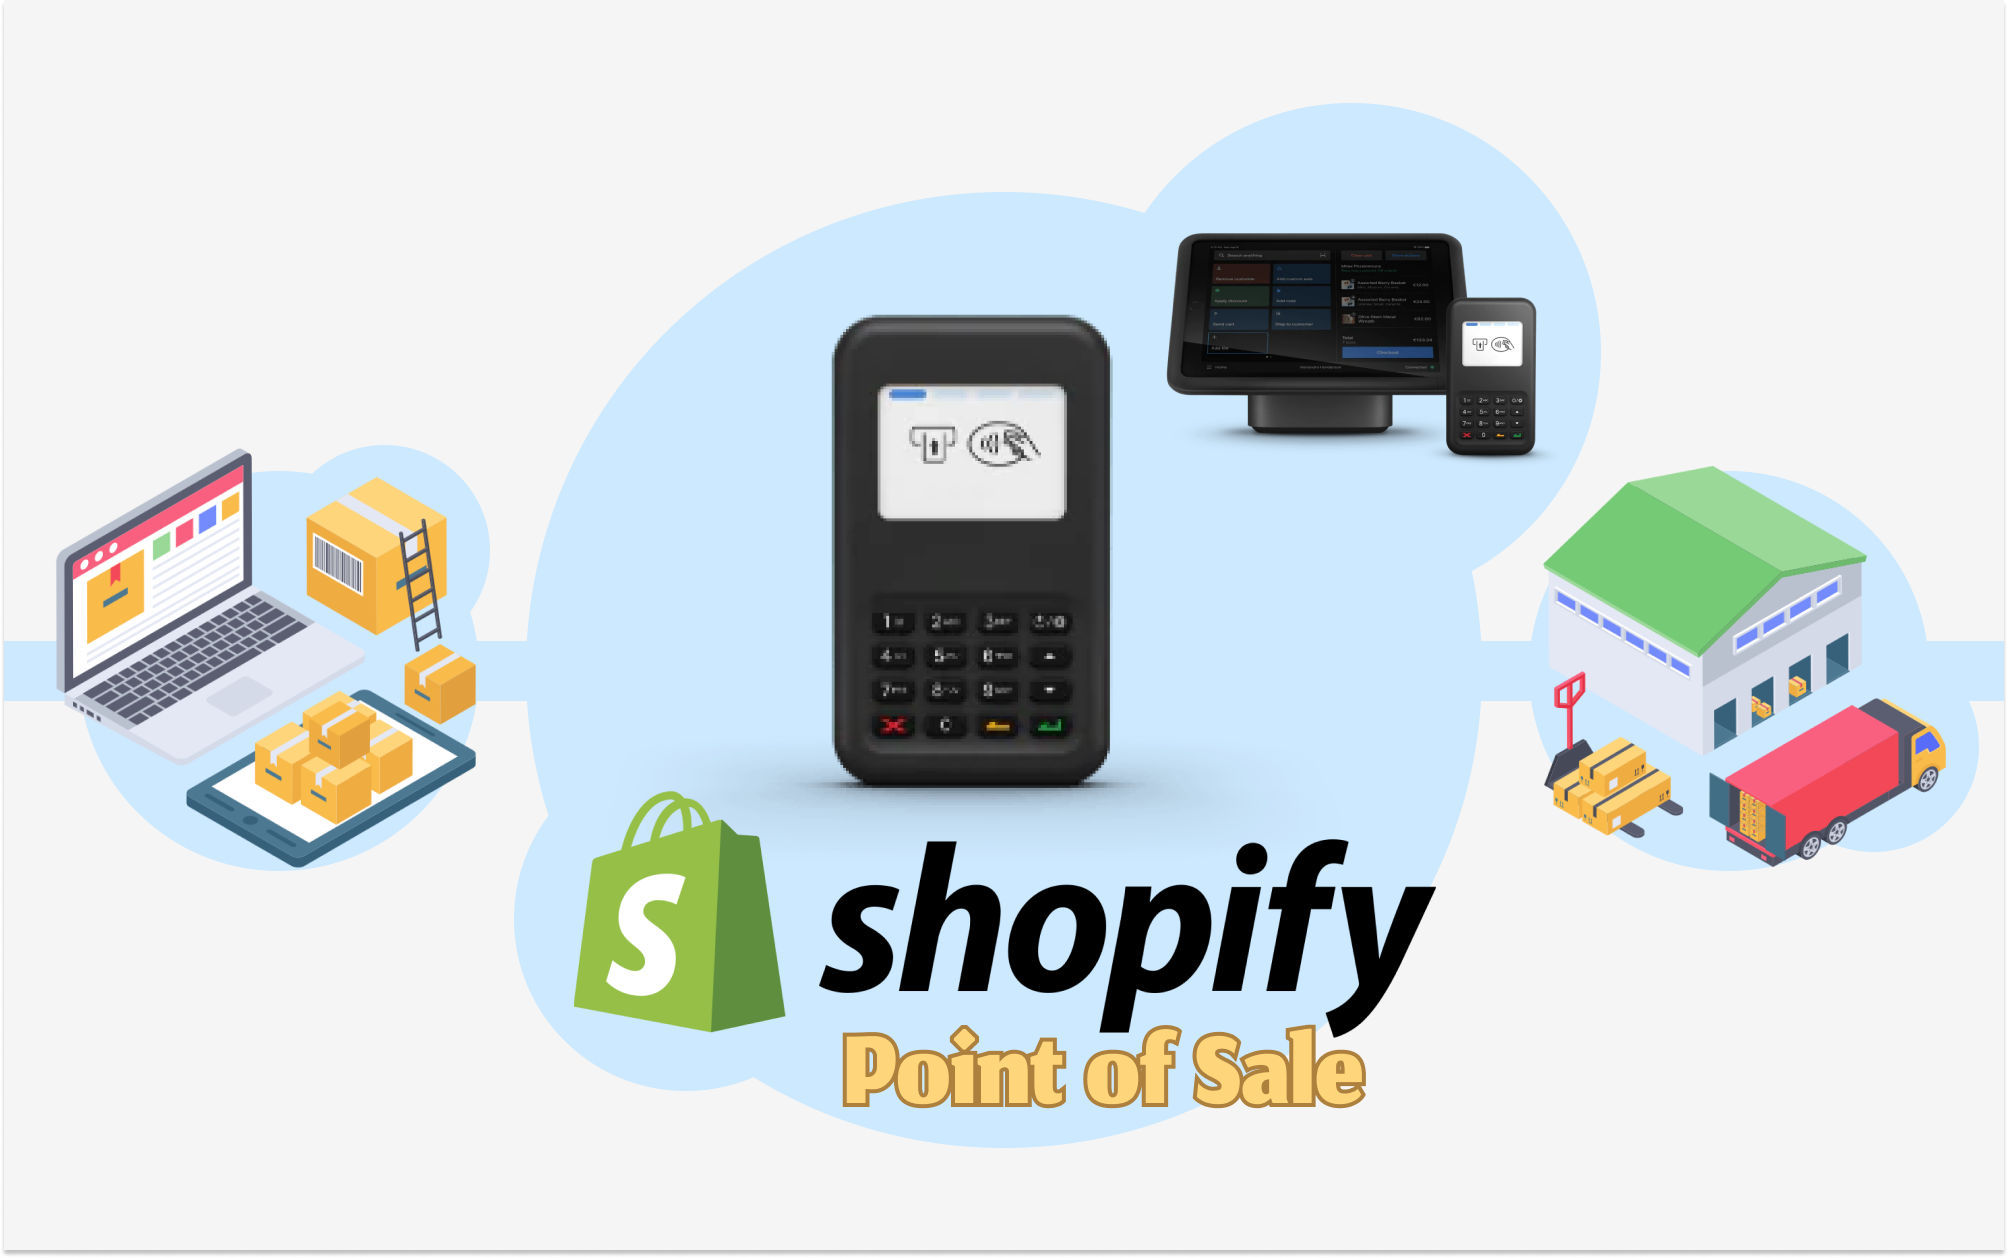 Shopify POS - An In-Store Payment Solution Review